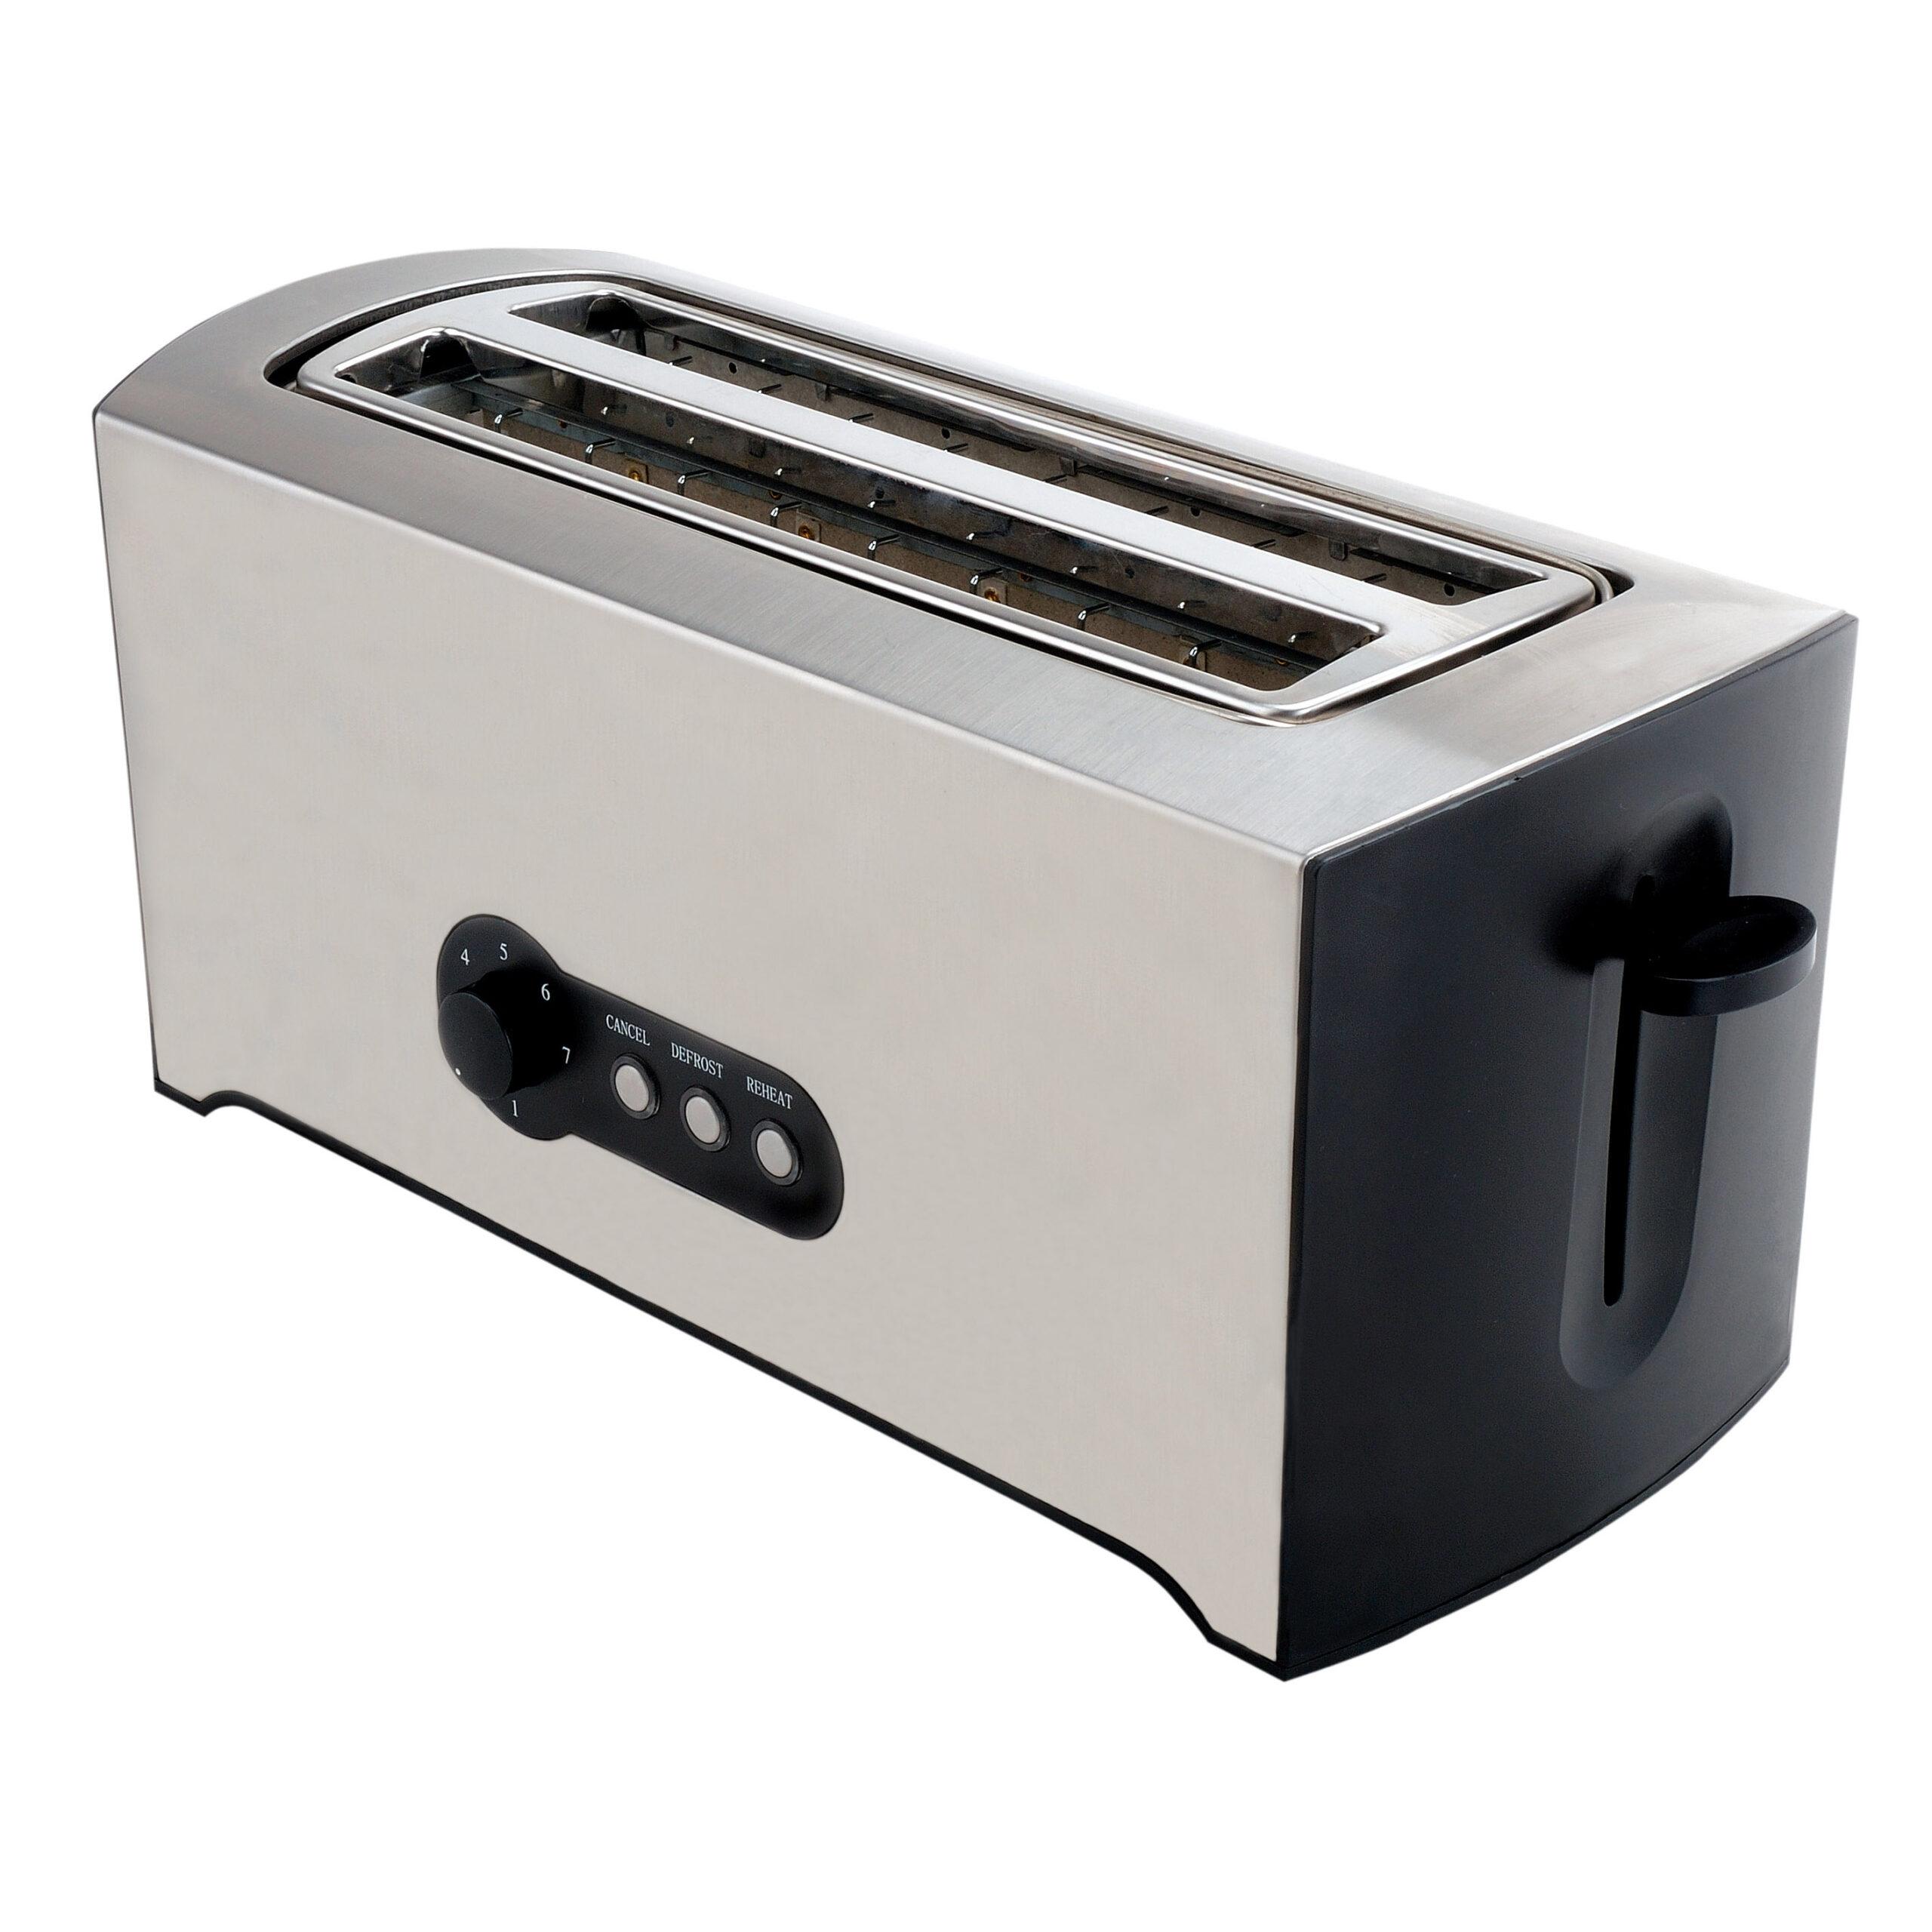 Geepas GBT36504UK 1600W 4 Slices Bread Toaster - Crumb Tray, Cord Storage, 7 Settings with Bun Warmer, Pop-Up Toaster with Stainless Steel Body - Ideal for Sandwich, Roasted Bread & More - 2 Years Warranty